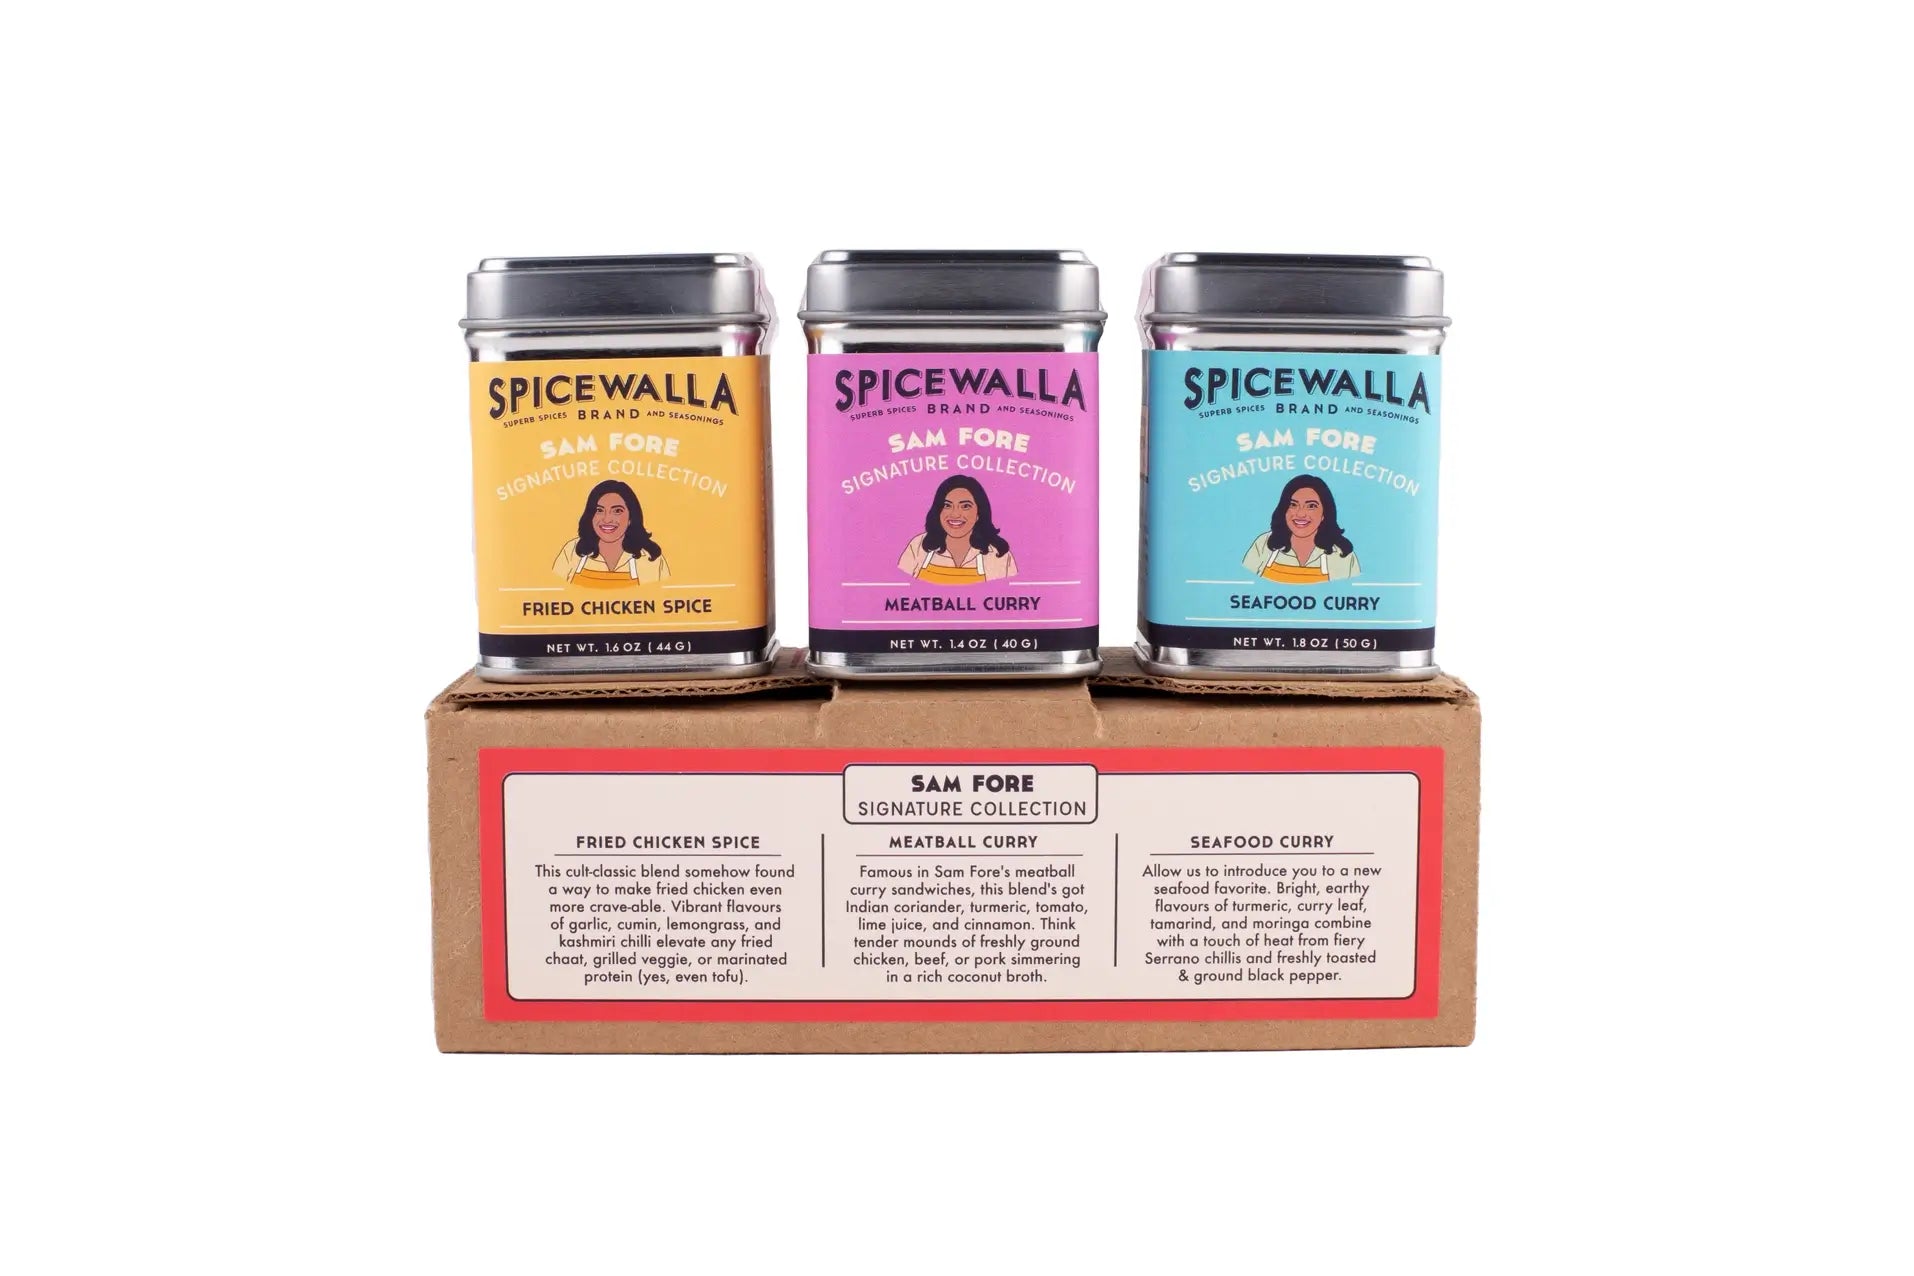 The Sam Fore Signature Collection from Spicewalla contains 3 spices: Fried Chicken Spice, Meatball Curry Powder, and Seafood Curry Powder in small tins.  